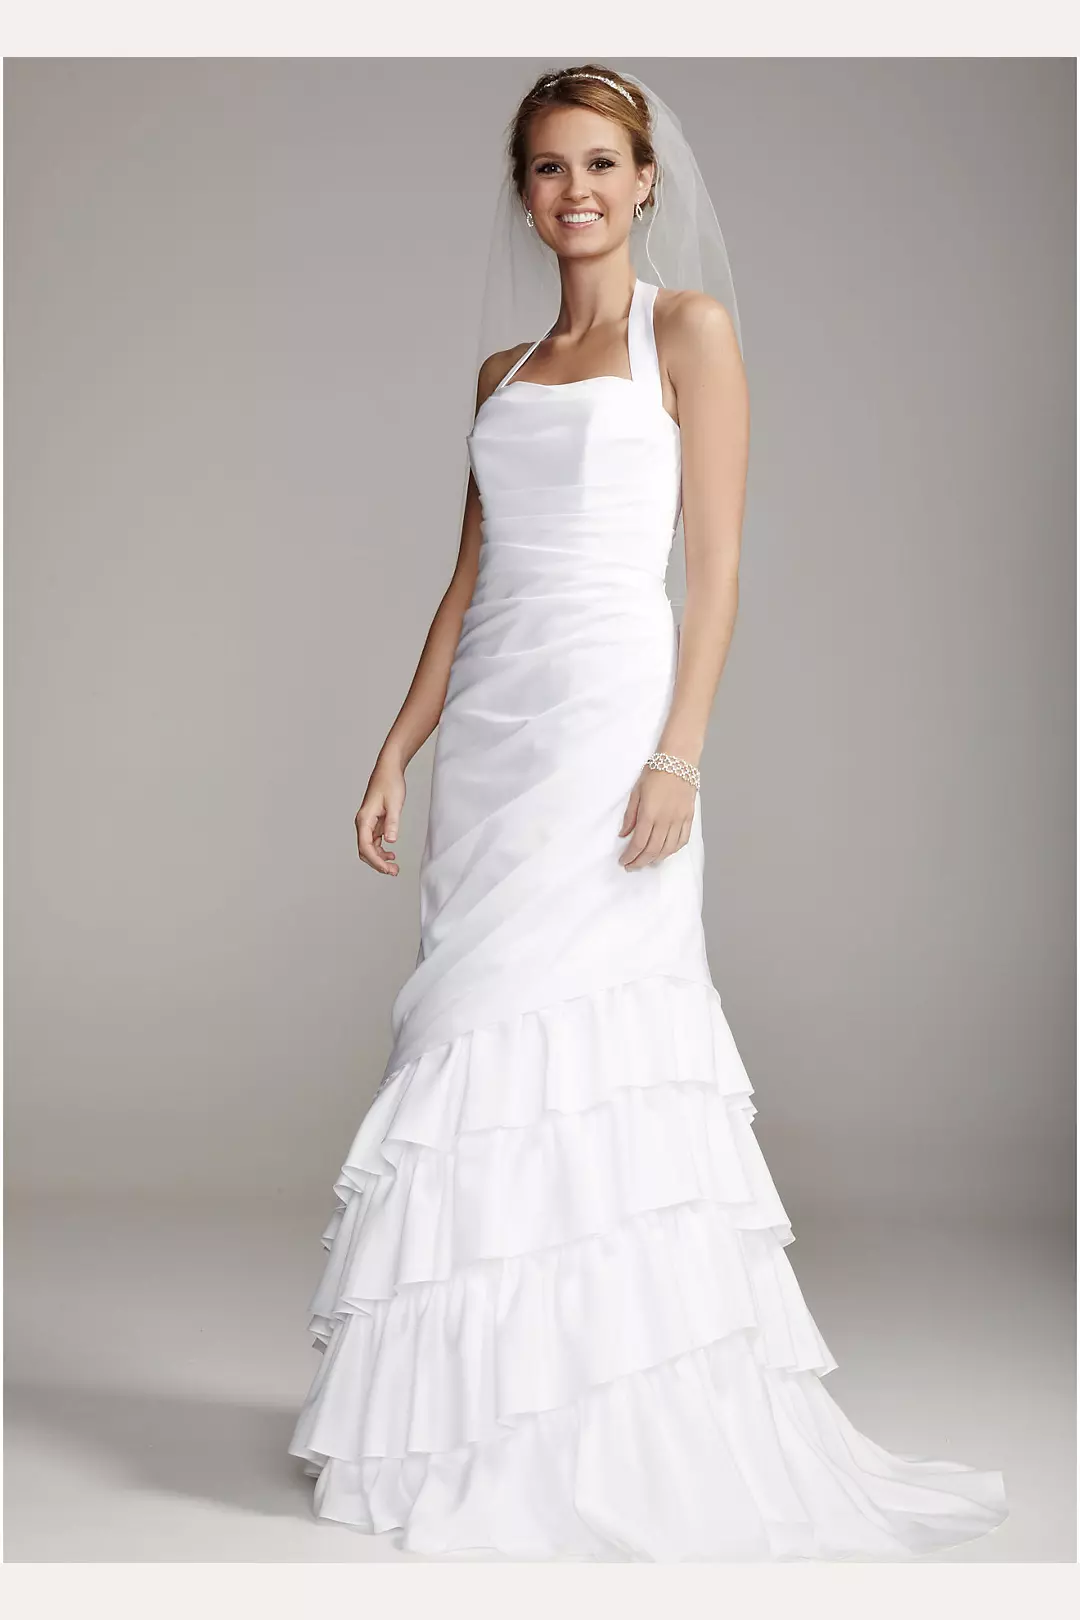 Satin Side Drape Gown with Tiered Skirt Image